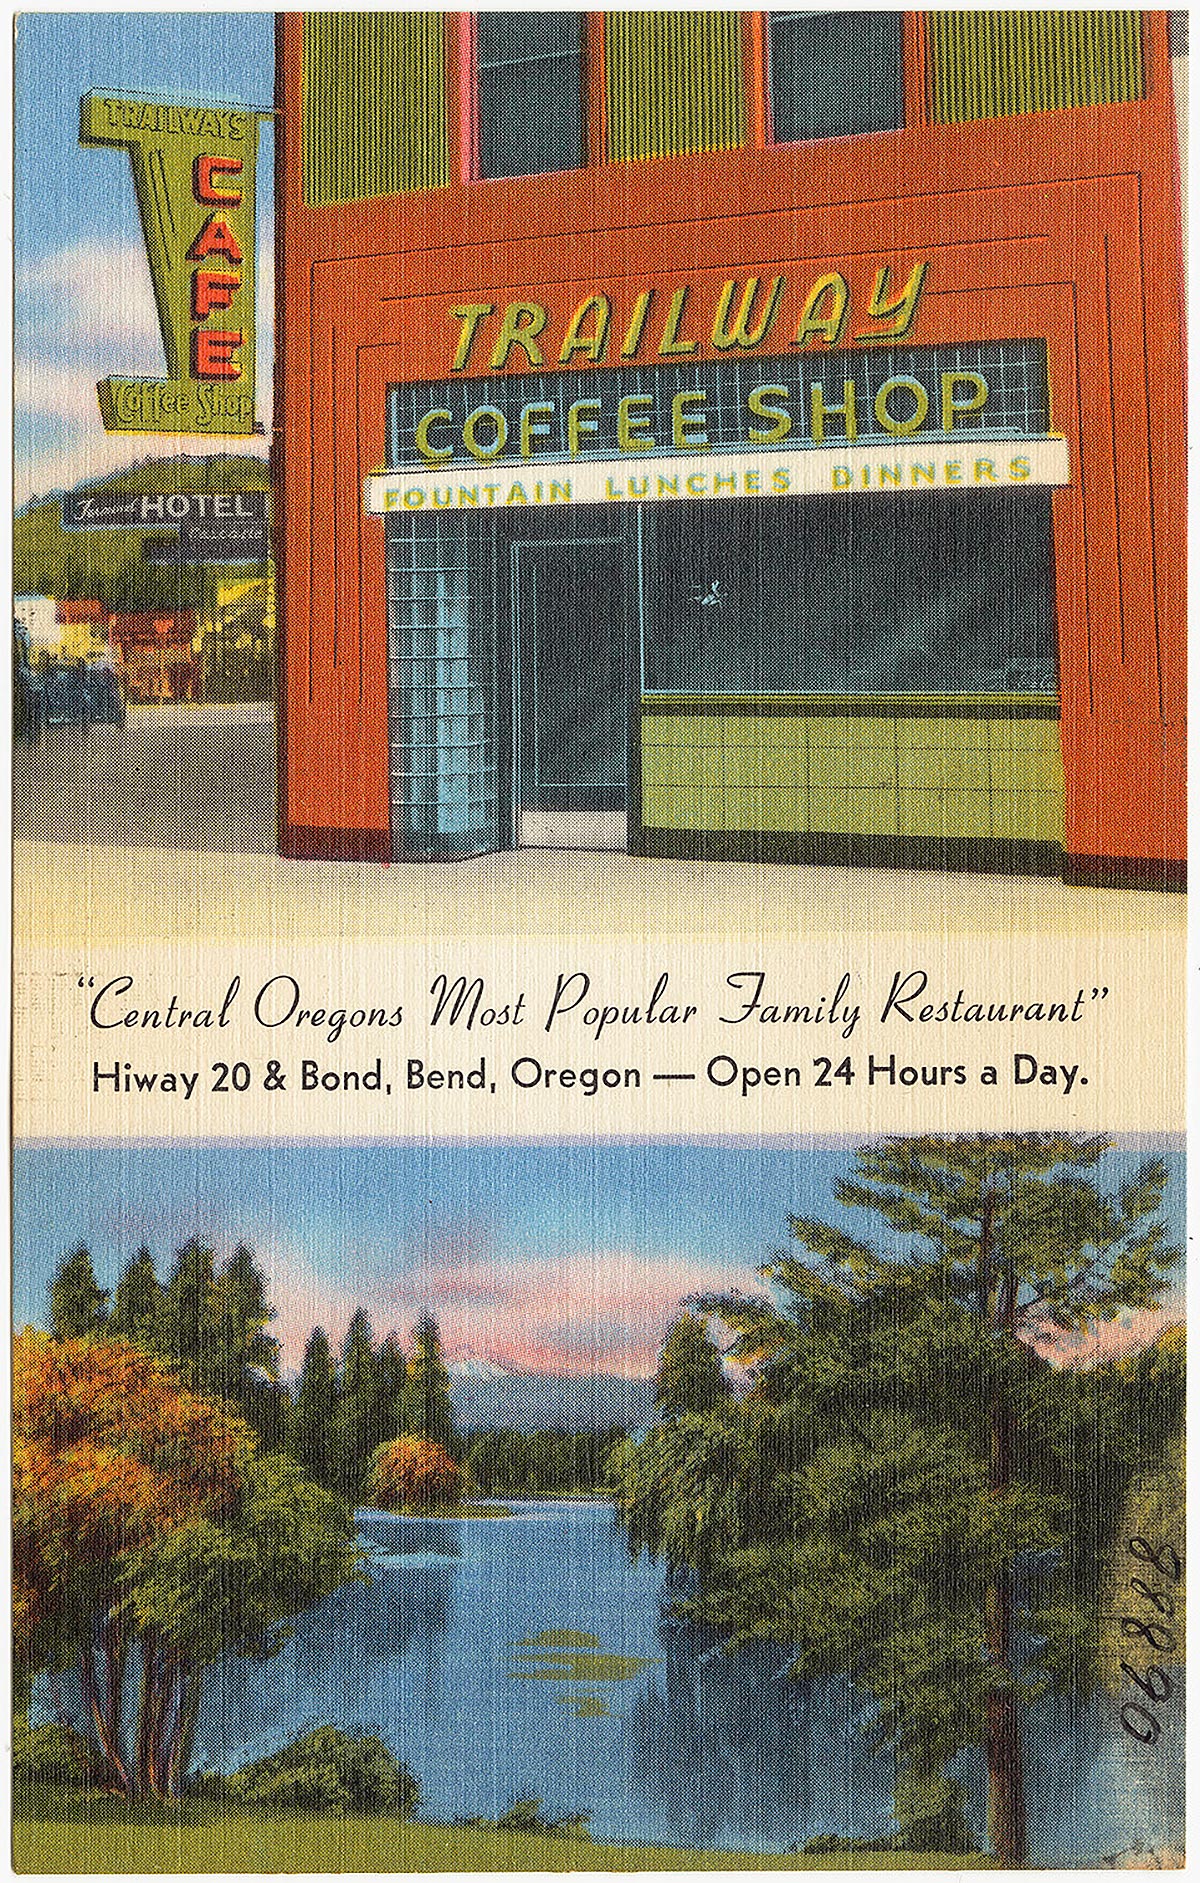 Description: uncropped version of the "Trailway Coffee Shop" postcard. The top portion of the image is the same as the first image in this article. Below in cursive is written "Central Oregons Most Popular Family Restaurant", Hiway 20 & Bond, Bend, Oregon. Open 24 Hours a Day. Below that, a colorful landscape: green pines and deciduous trees with golden leaves, on a green river slope. In the background is a wide river, a snow-capped mountain, and blue sky.